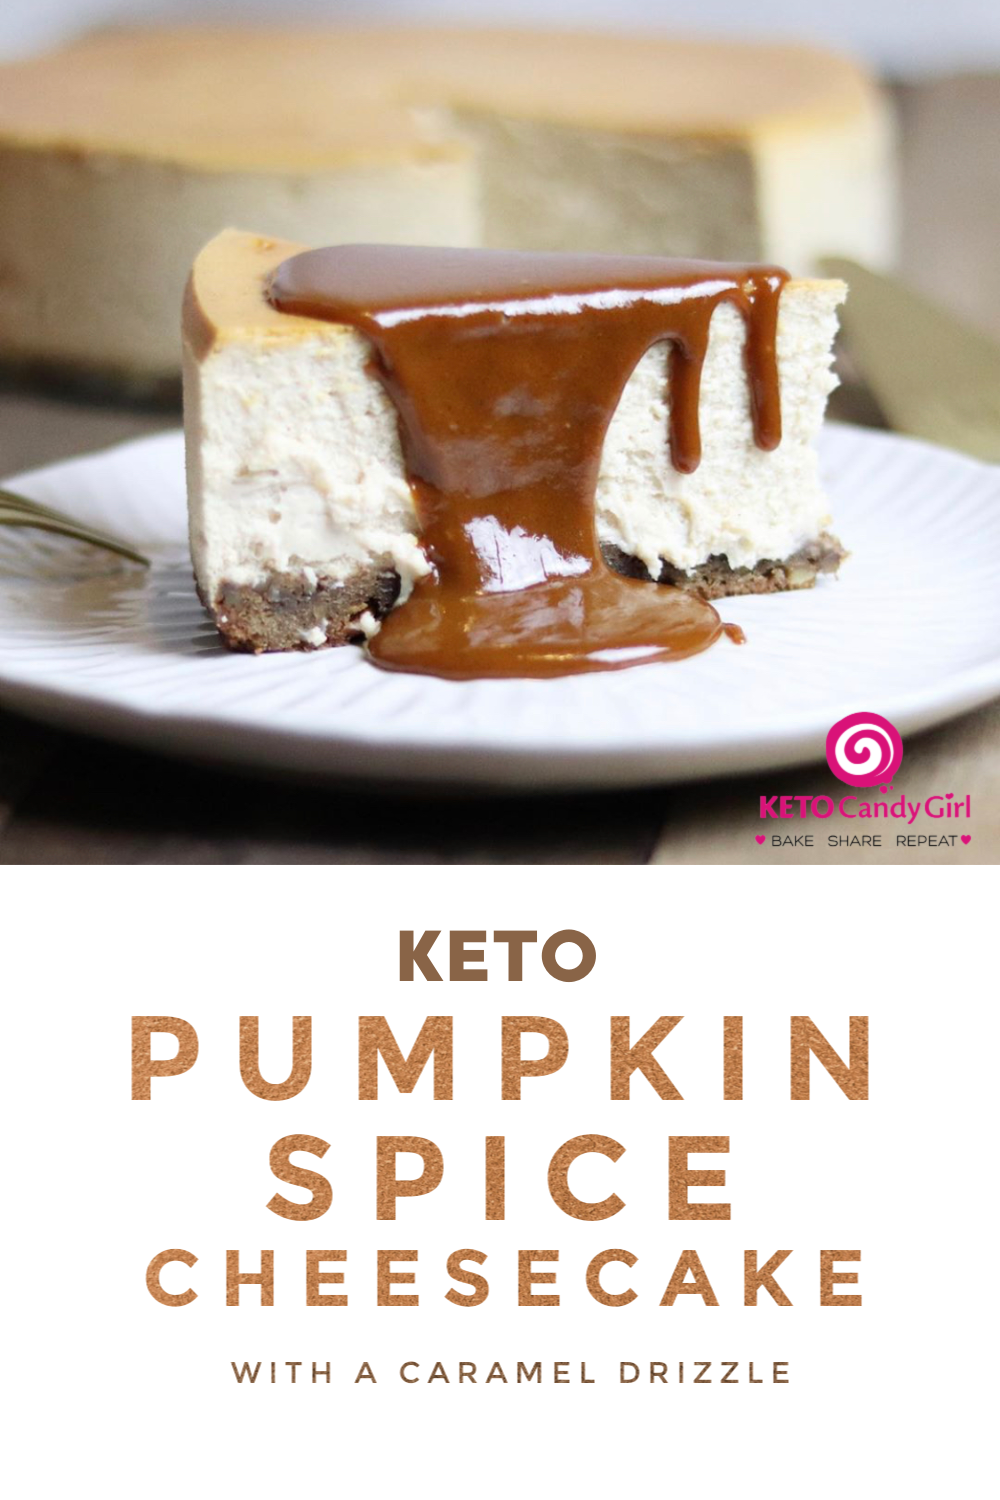 Keto Pumpkin Spice Cheesecake (with a caramel drizzle) - Keto Candy Girl